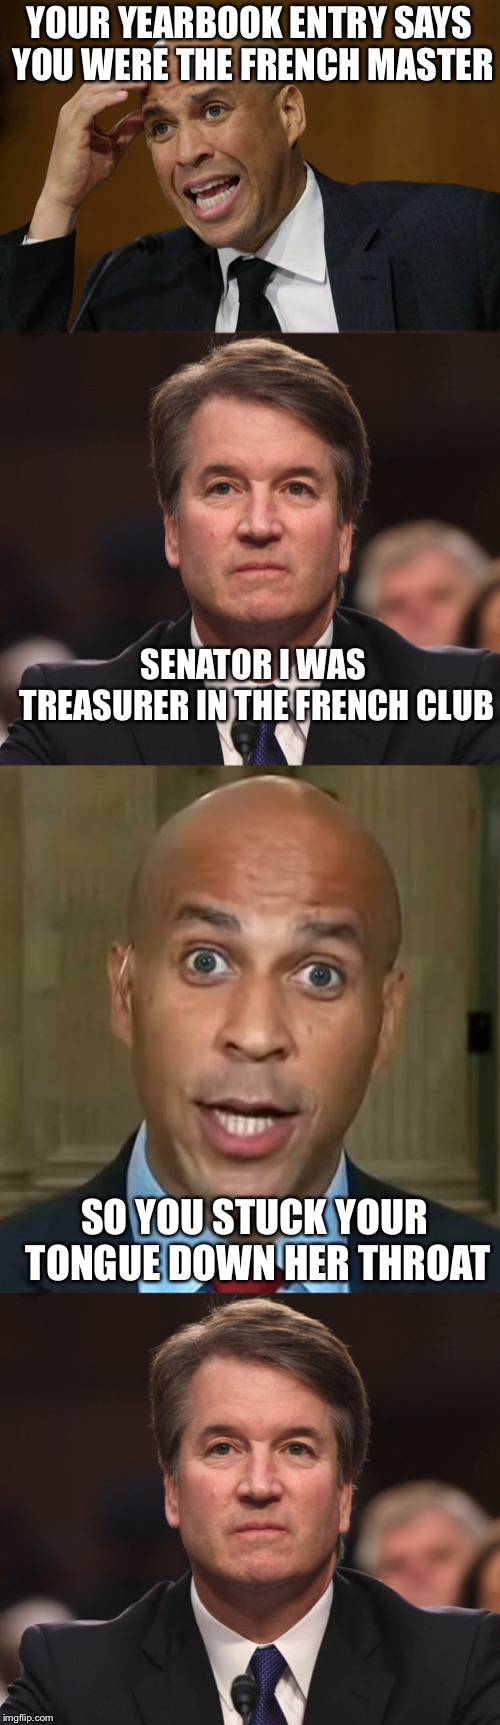 Corey Booker grills Kavanaugh on his high school yearbook entry | YOUR YEARBOOK ENTRY SAYS YOU WERE THE FRENCH MASTER; SENATOR I WAS TREASURER IN THE FRENCH CLUB; SO YOU STUCK YOUR TONGUE DOWN HER THROAT | image tagged in brett kavanaugh,corey booker,supreme court,memes | made w/ Imgflip meme maker